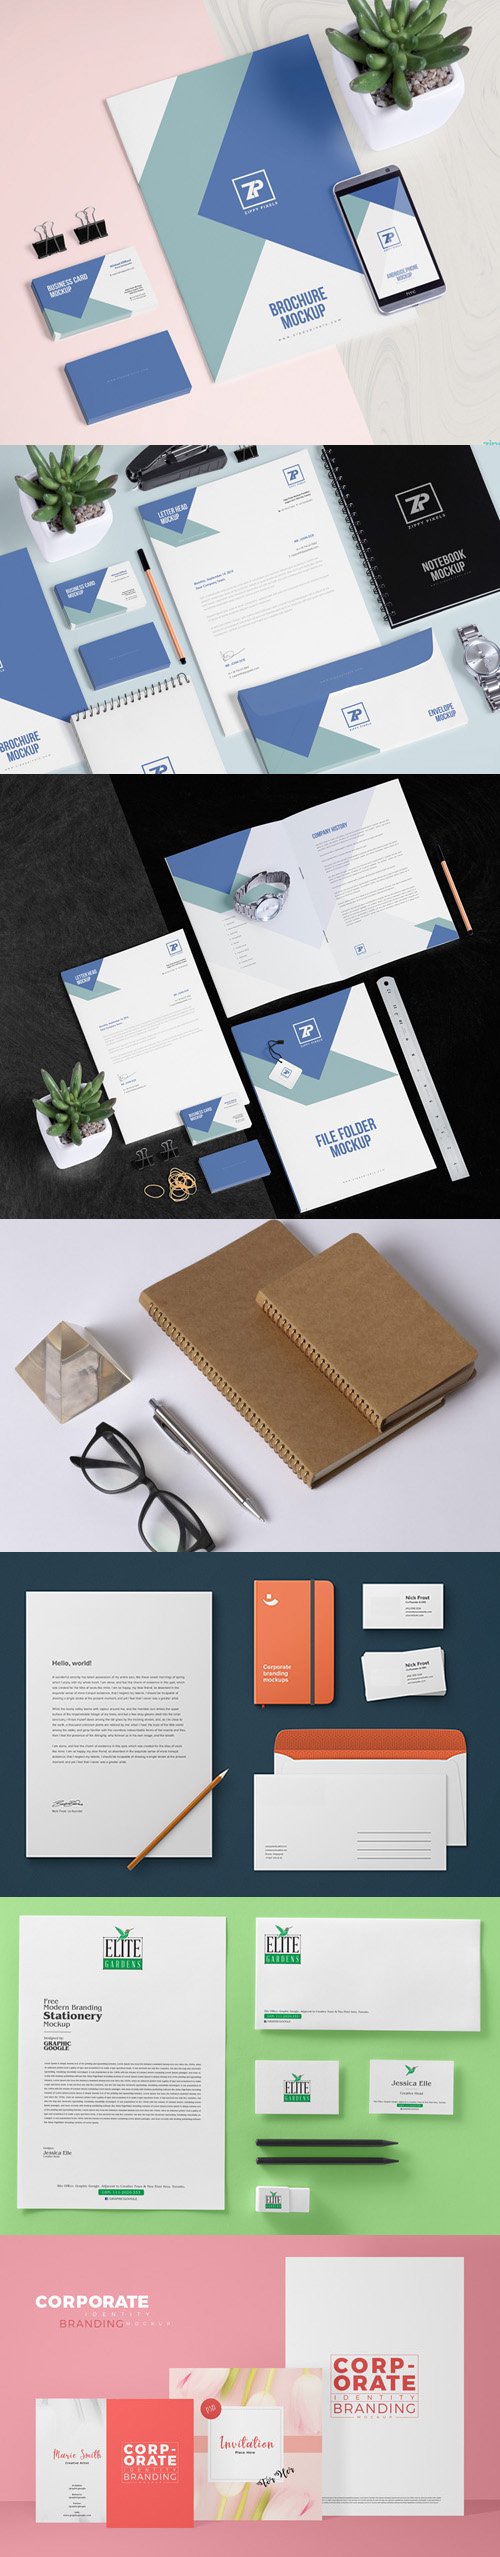 9 Corporate Identity Branding Stationary PSD Mockups Collection